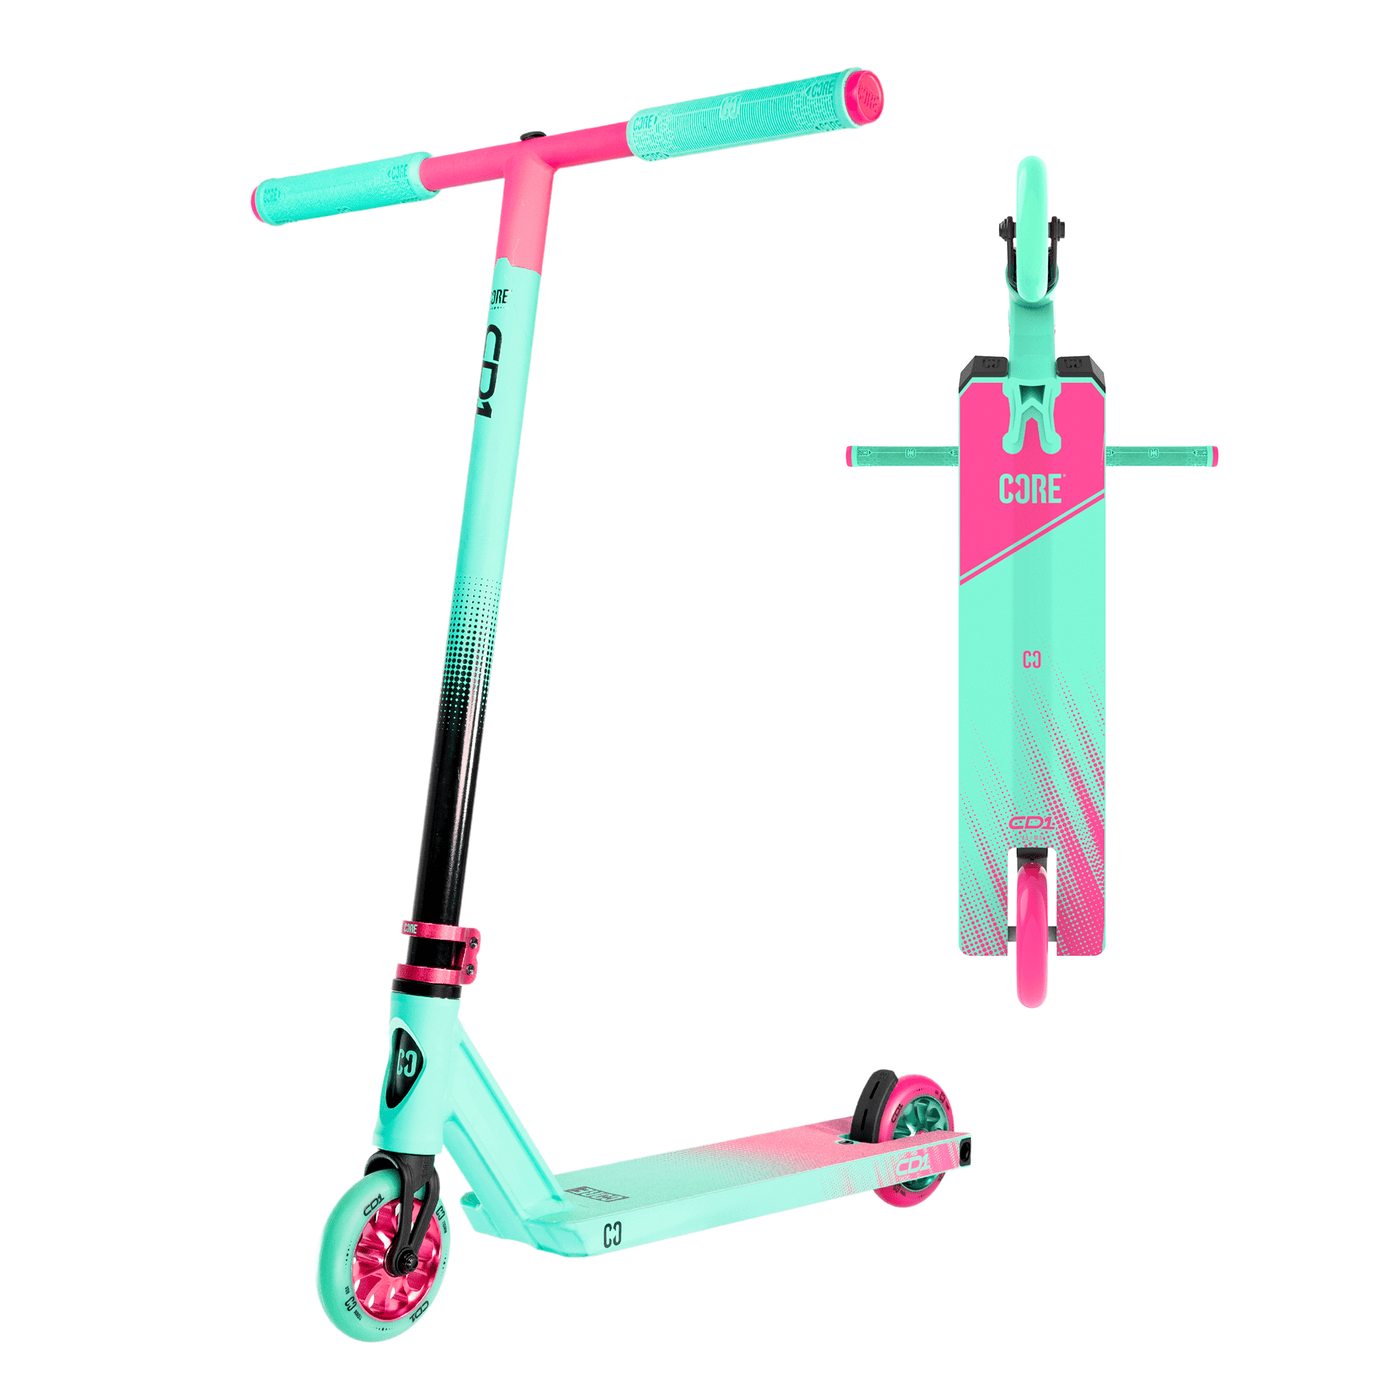 CORE CD1 Complete Stunt Scooter Teal & Pink I Adult Stunt Scooter